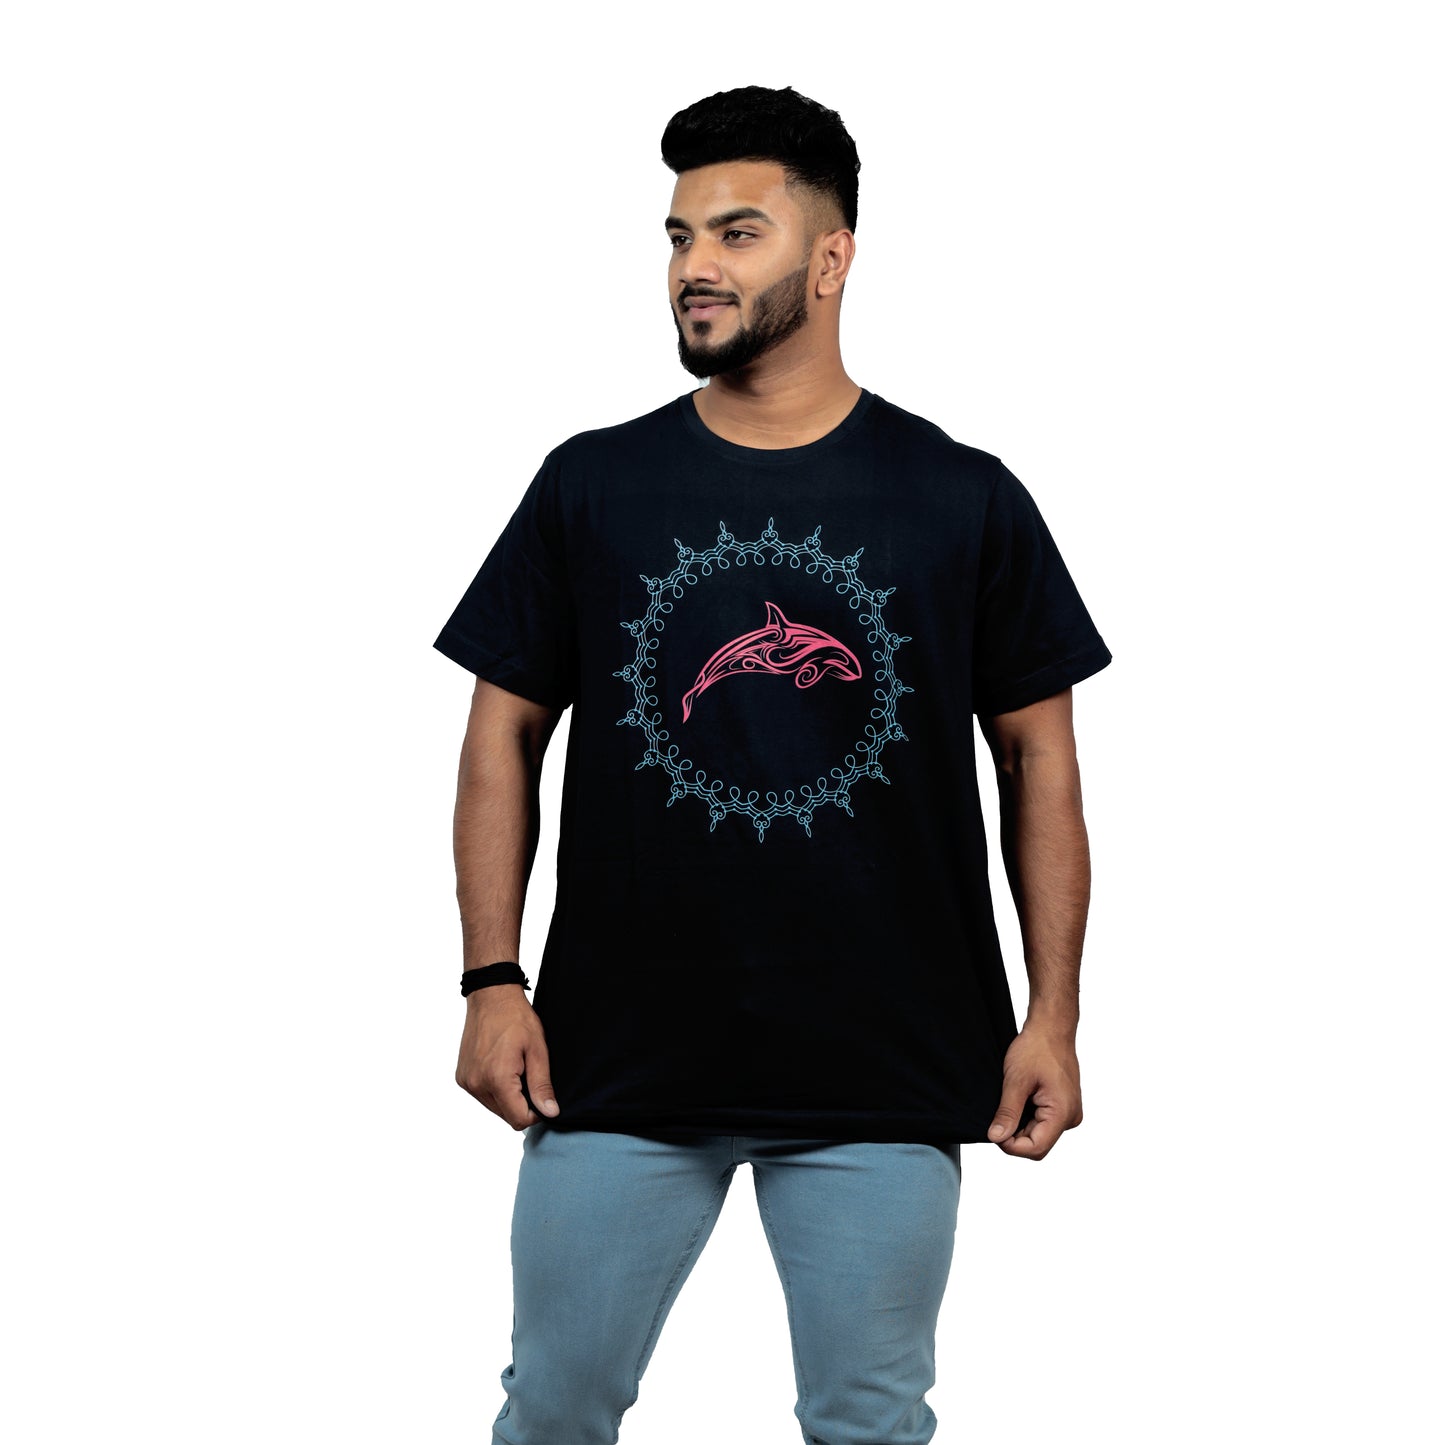 Nirvana Orca Printed T-shirt Navy Blue Color For Men